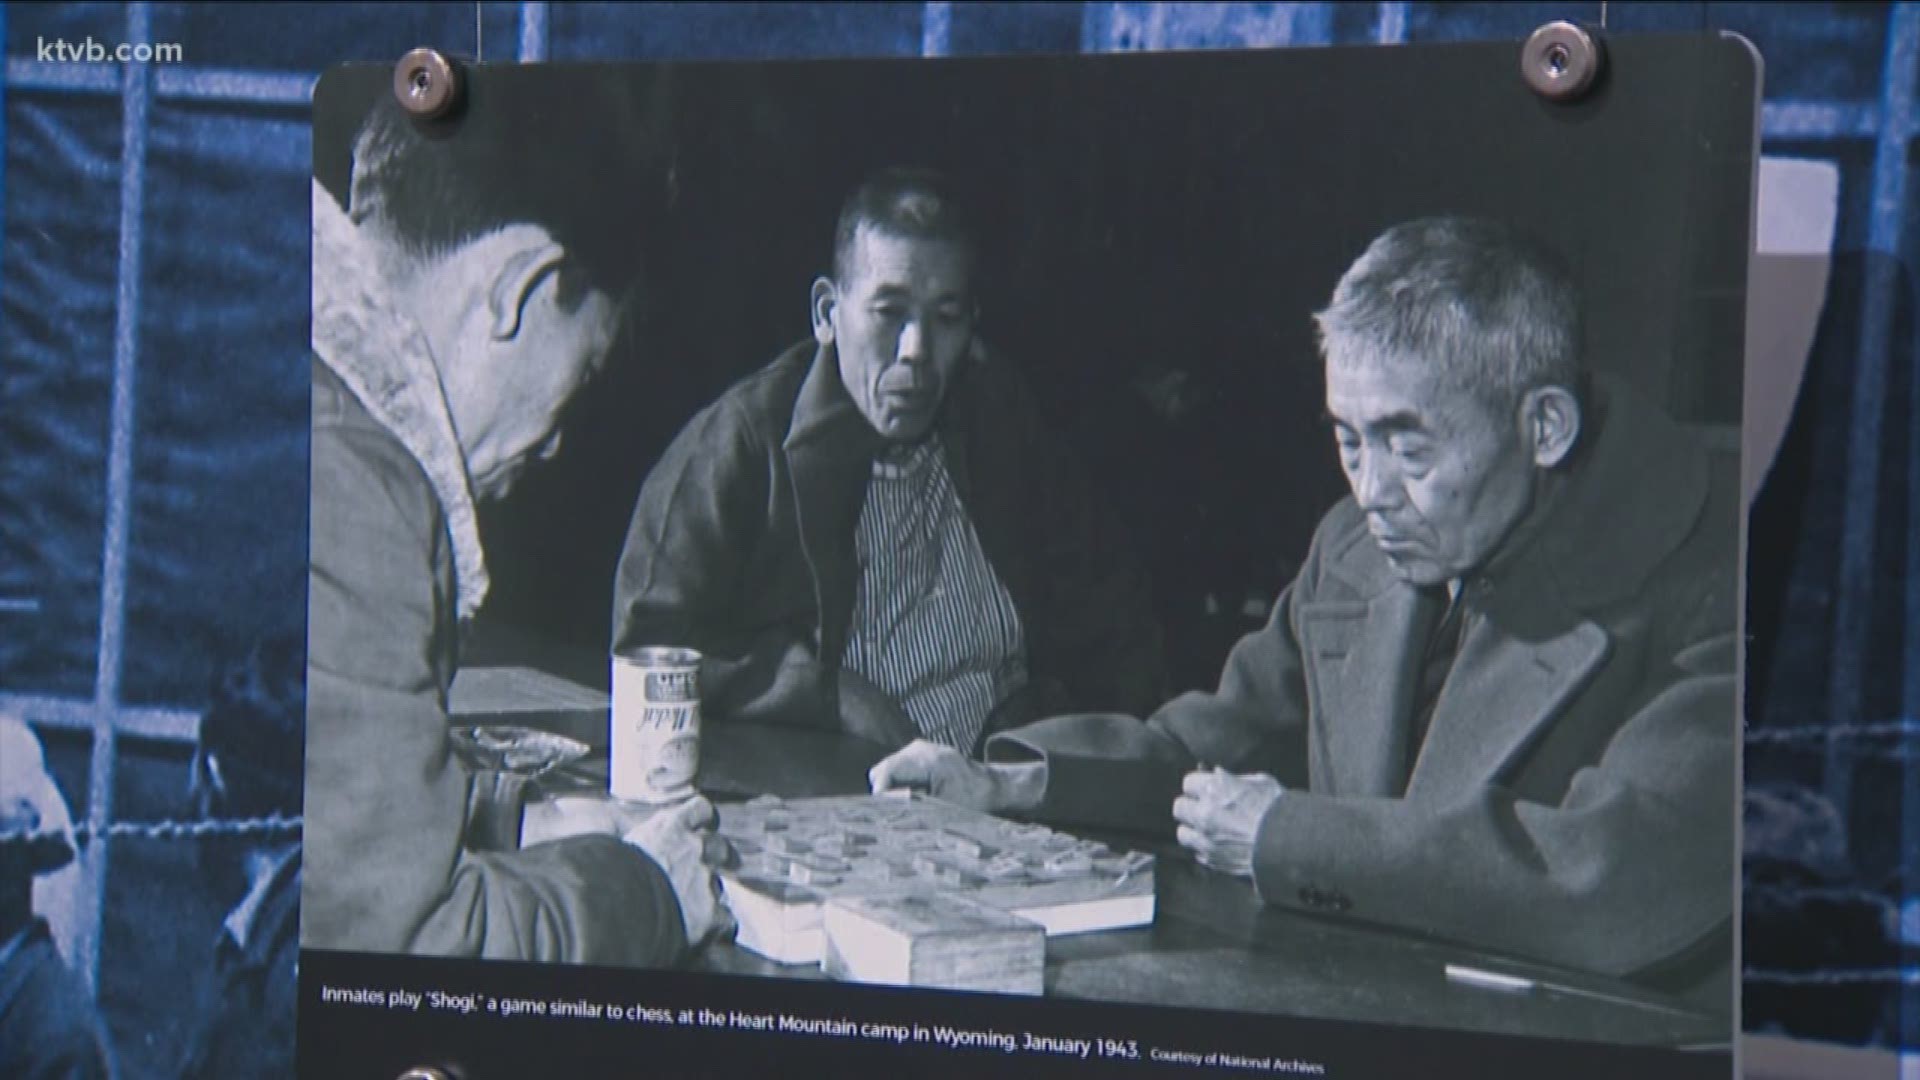 Beginning Saturday, a traveling exhibit showcasing the stories, pictures, and personal items of those who were held in the camps will open at the Idaho State Museum.